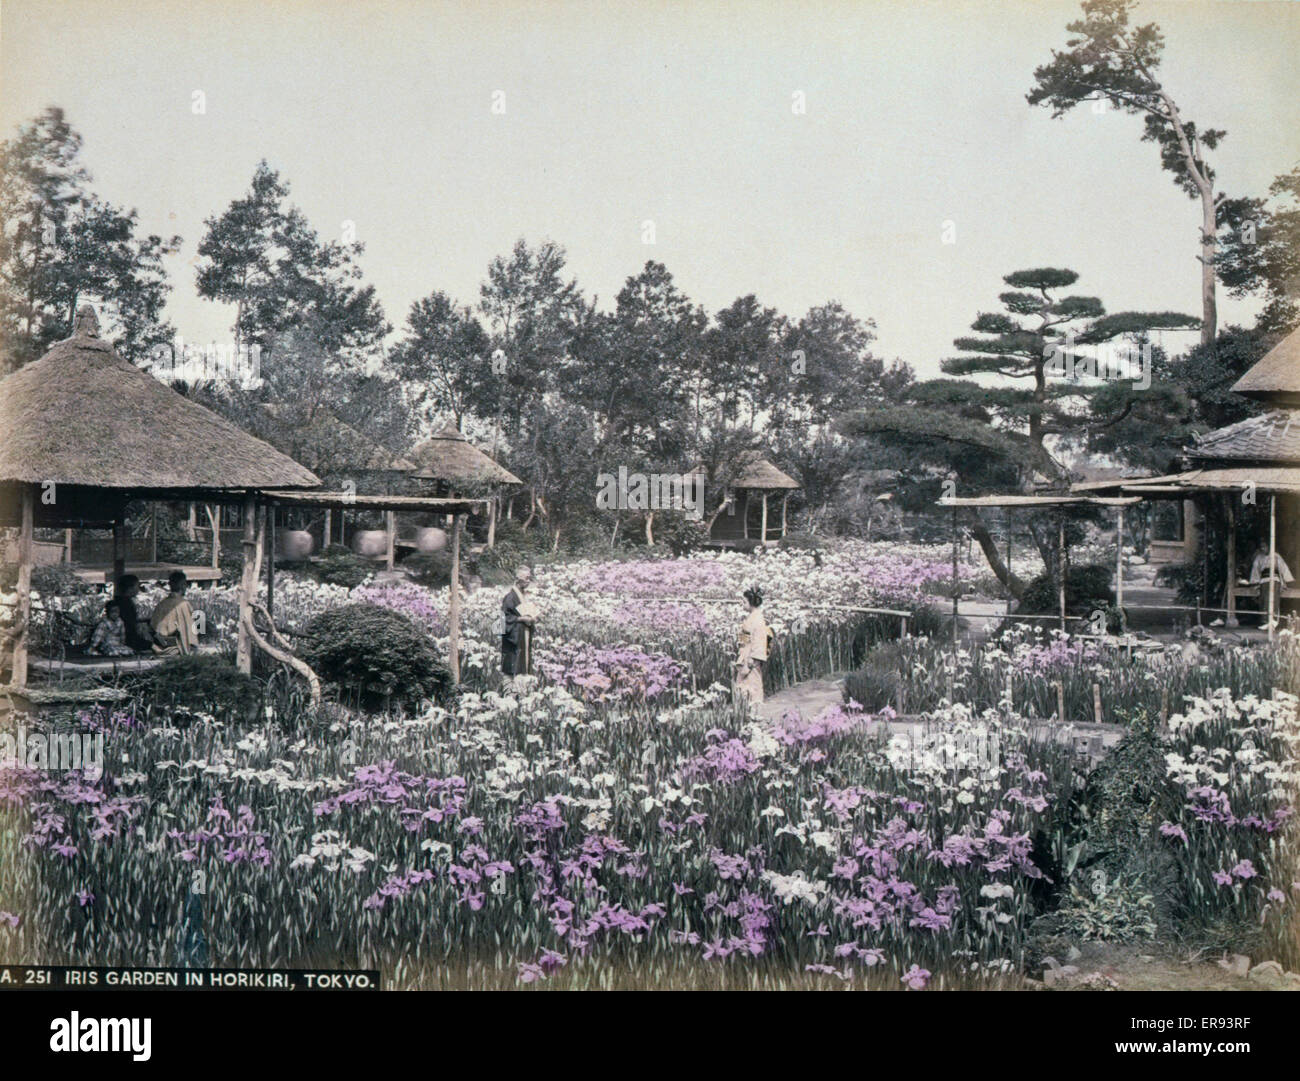 Iris garden in Horikiri, Tokio. Photograph shows blossoming irises at the Horikiri iris garden in Tokyo. Watercolor drawings on the mount depict thatched-roof buildings in the upper right and trees straw around the trunks in the lower left. Date ca. 1890. Stock Photo